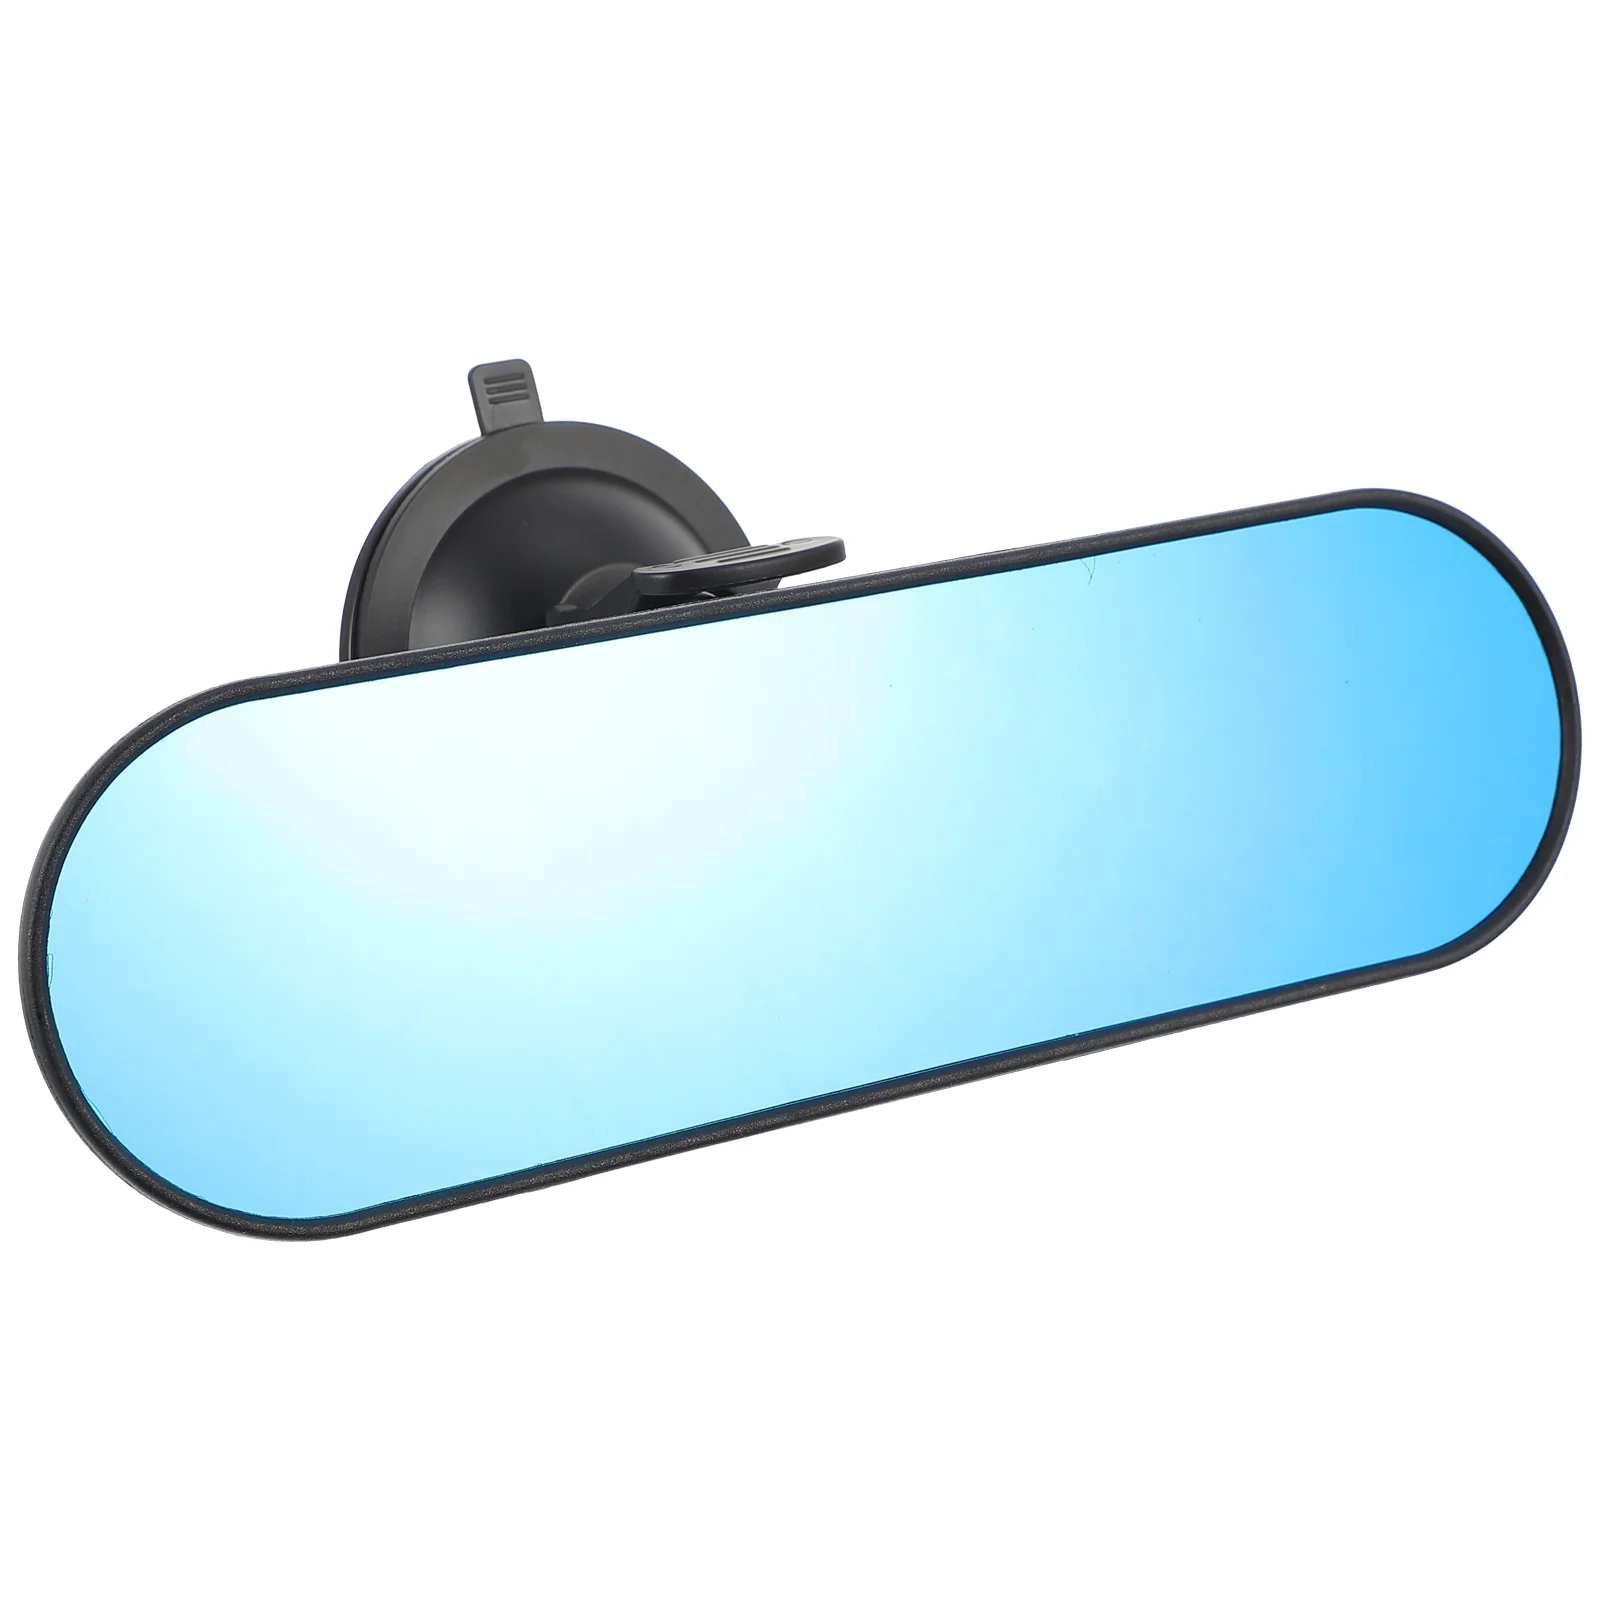 

Babyautomotive Suction Cup Mirror Rear View Vehicle Rearview Truck Engineering Plastics Child